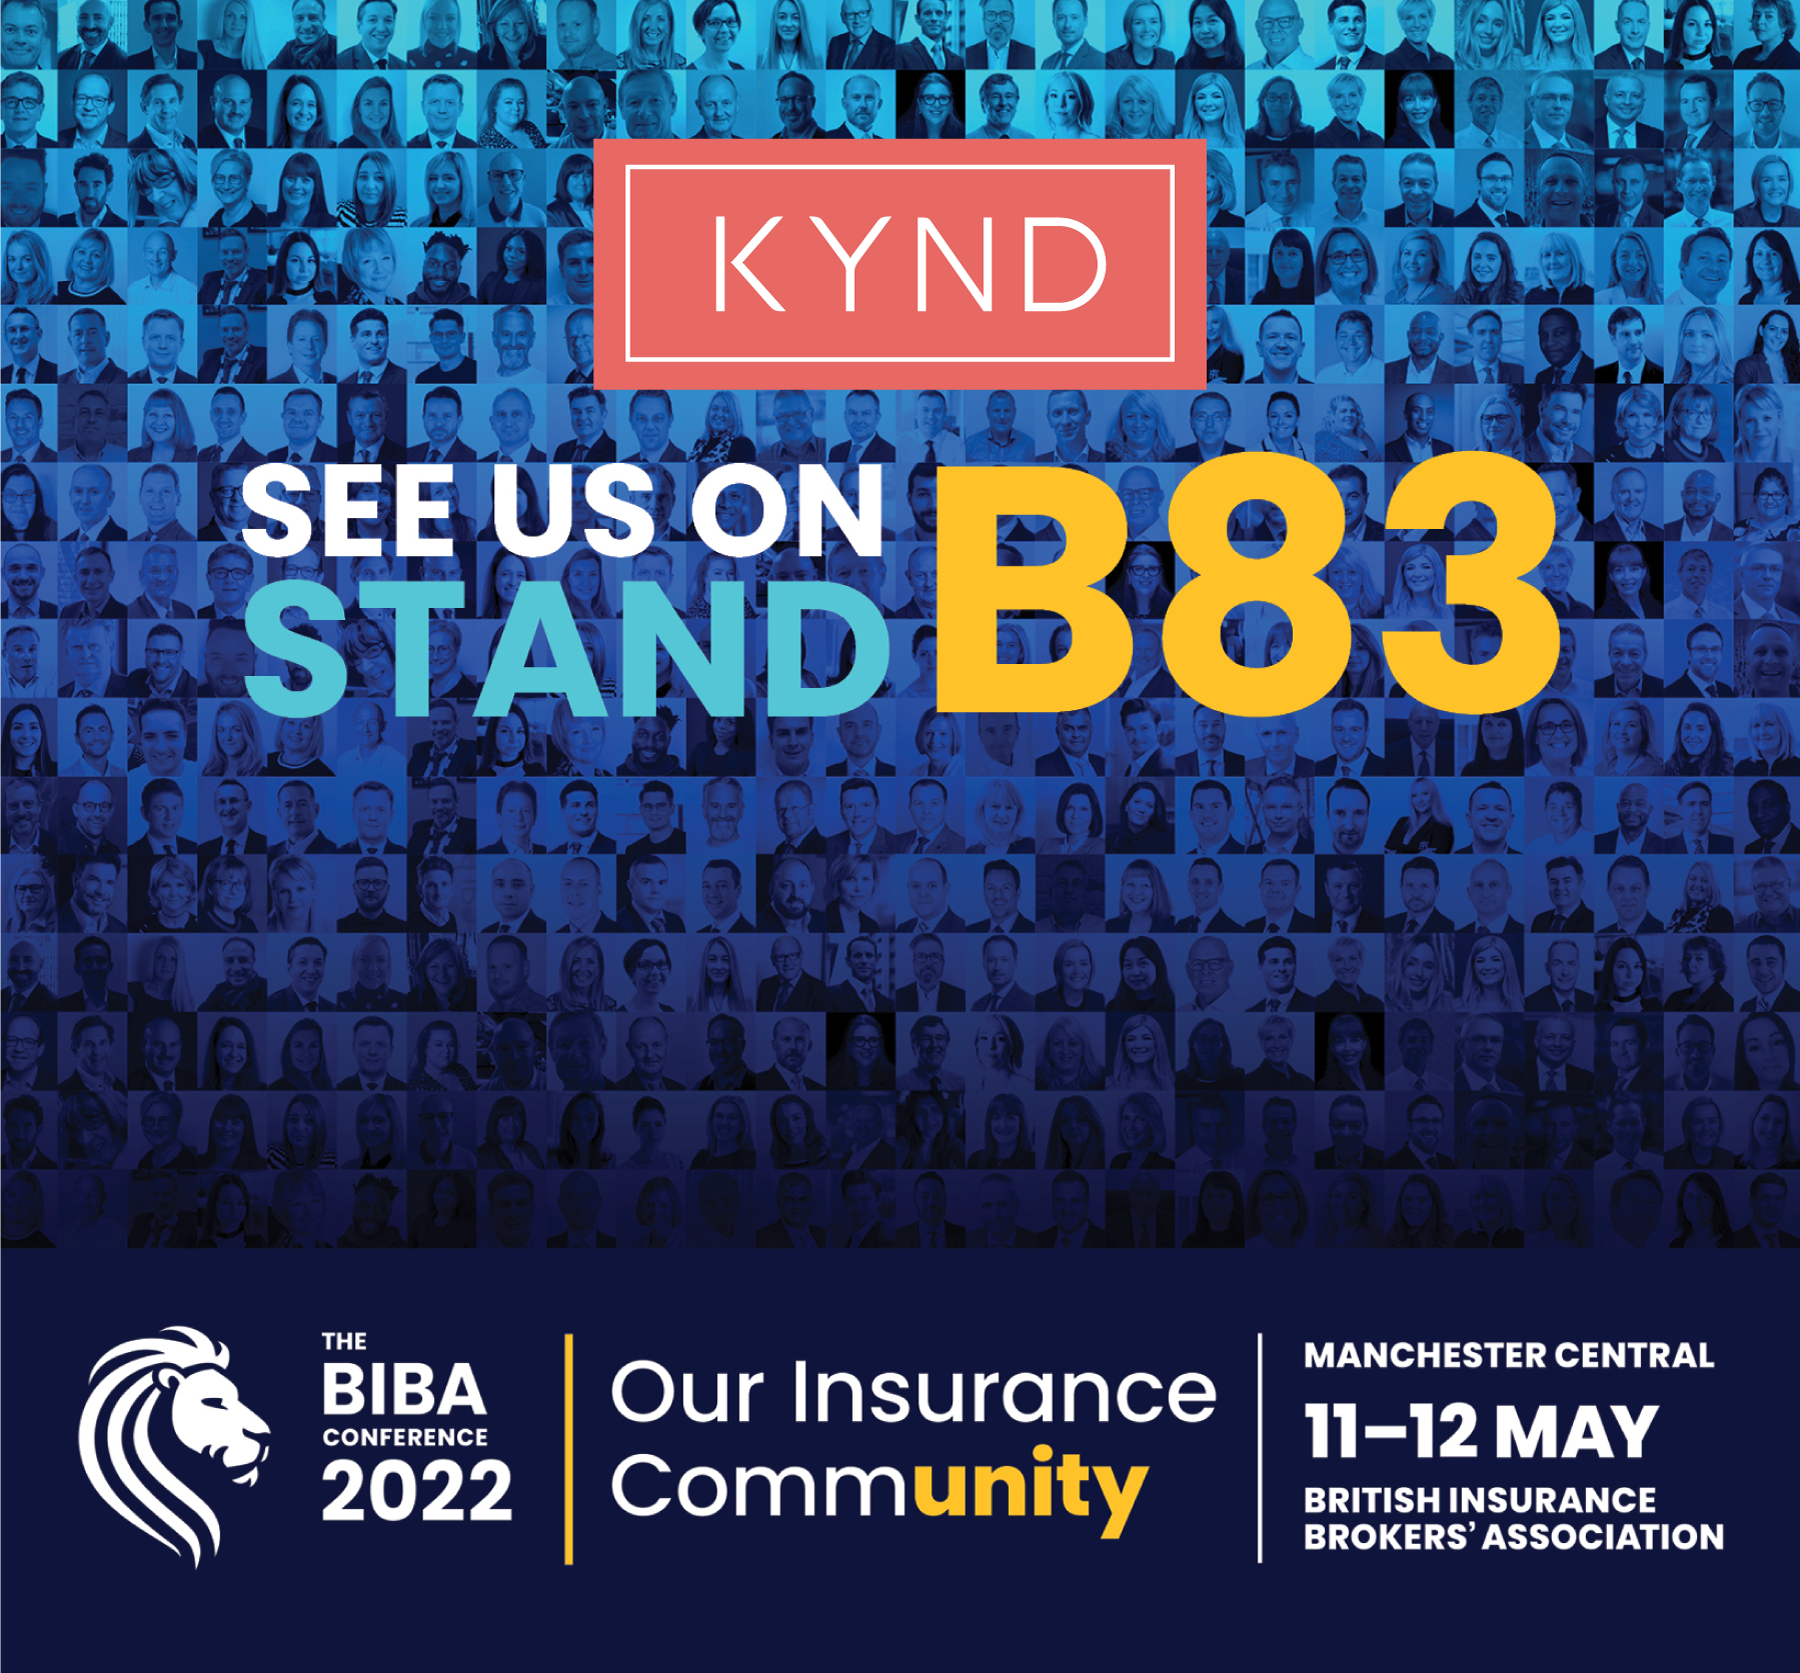 KYND to launch pioneering KYND Ready for Brokers at BIBA 2022